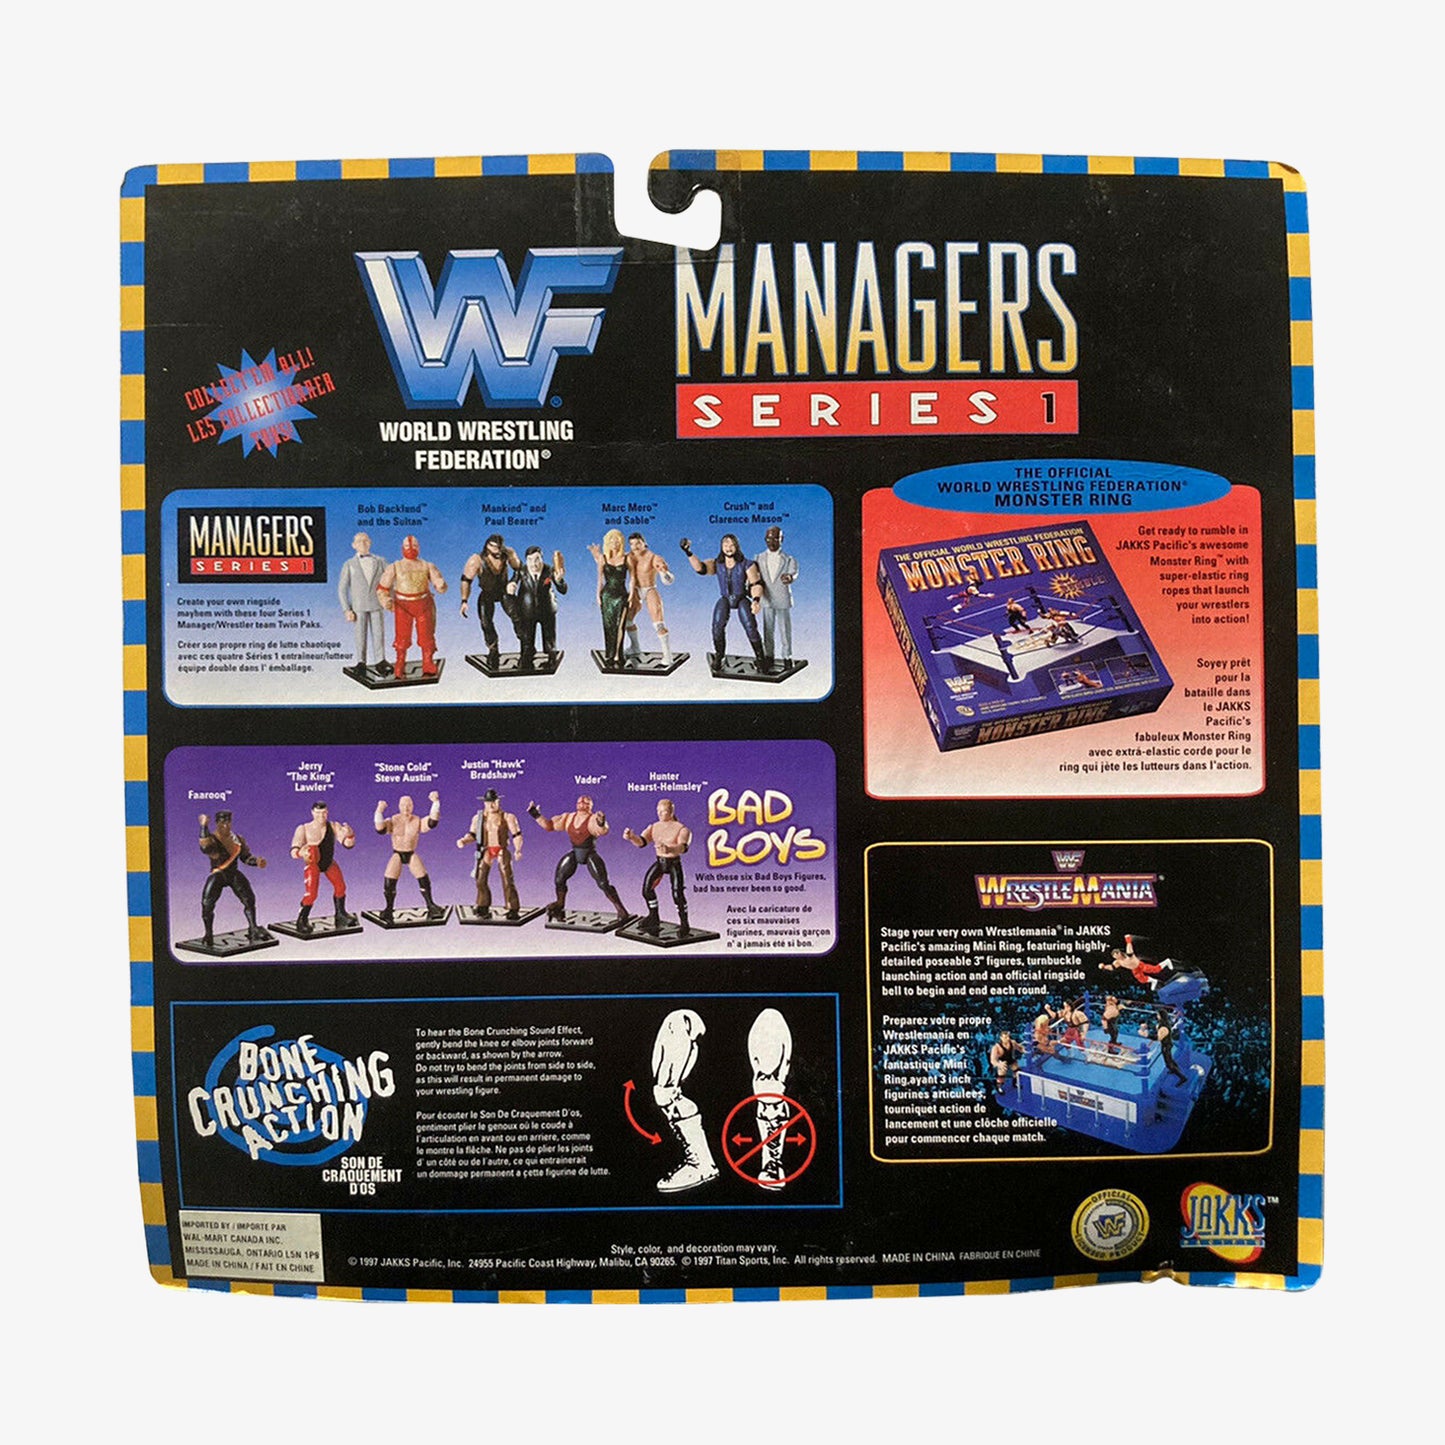 WWF Jakks Pacific Managers Series 1 Sable and Marc Mero figures available at slamazon.ca